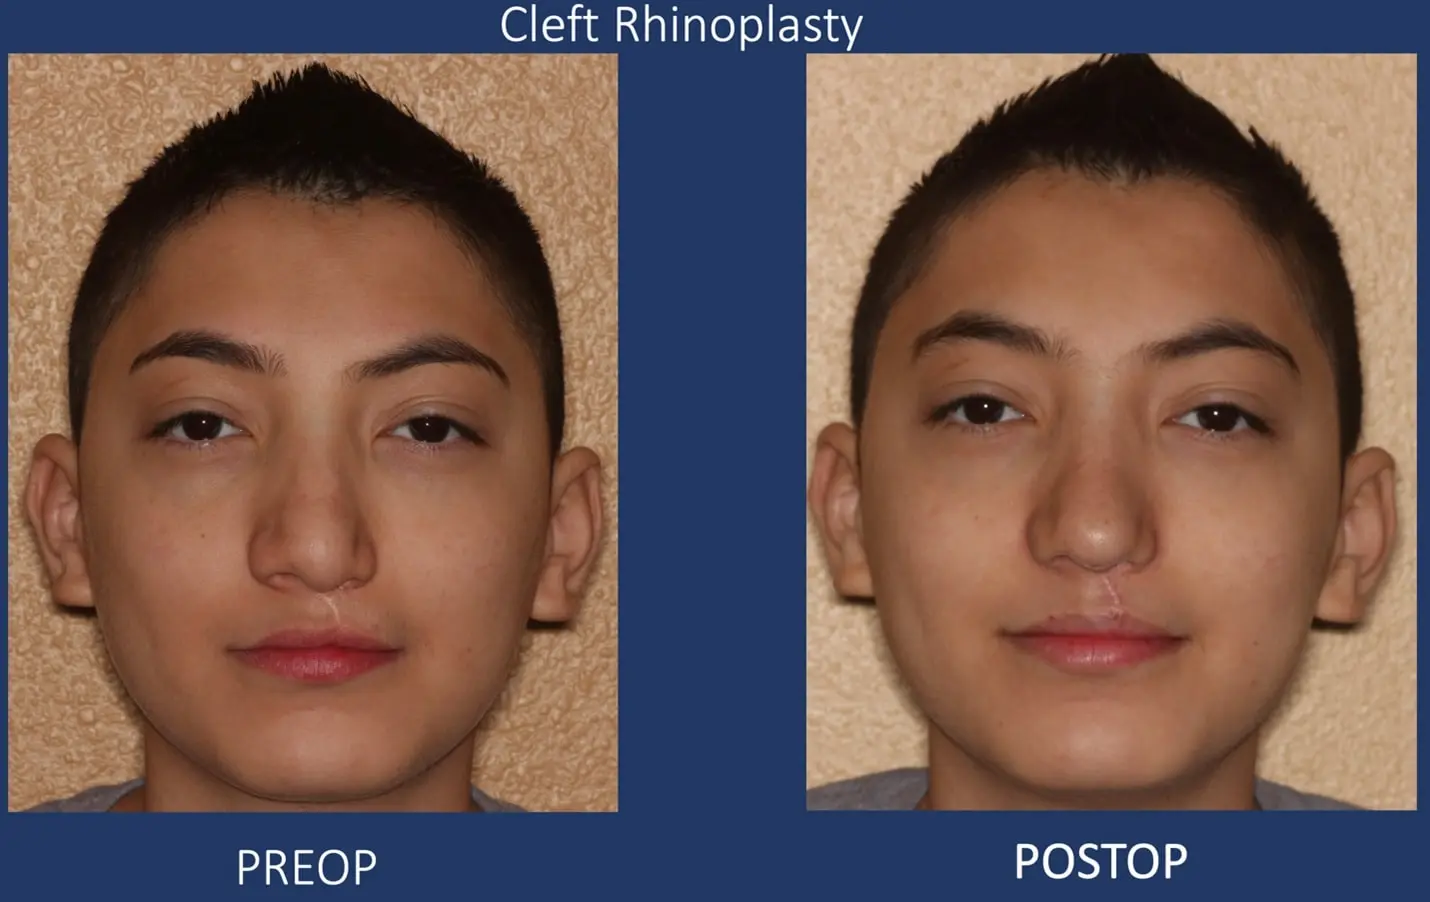 cleft rhinoplasty before and after